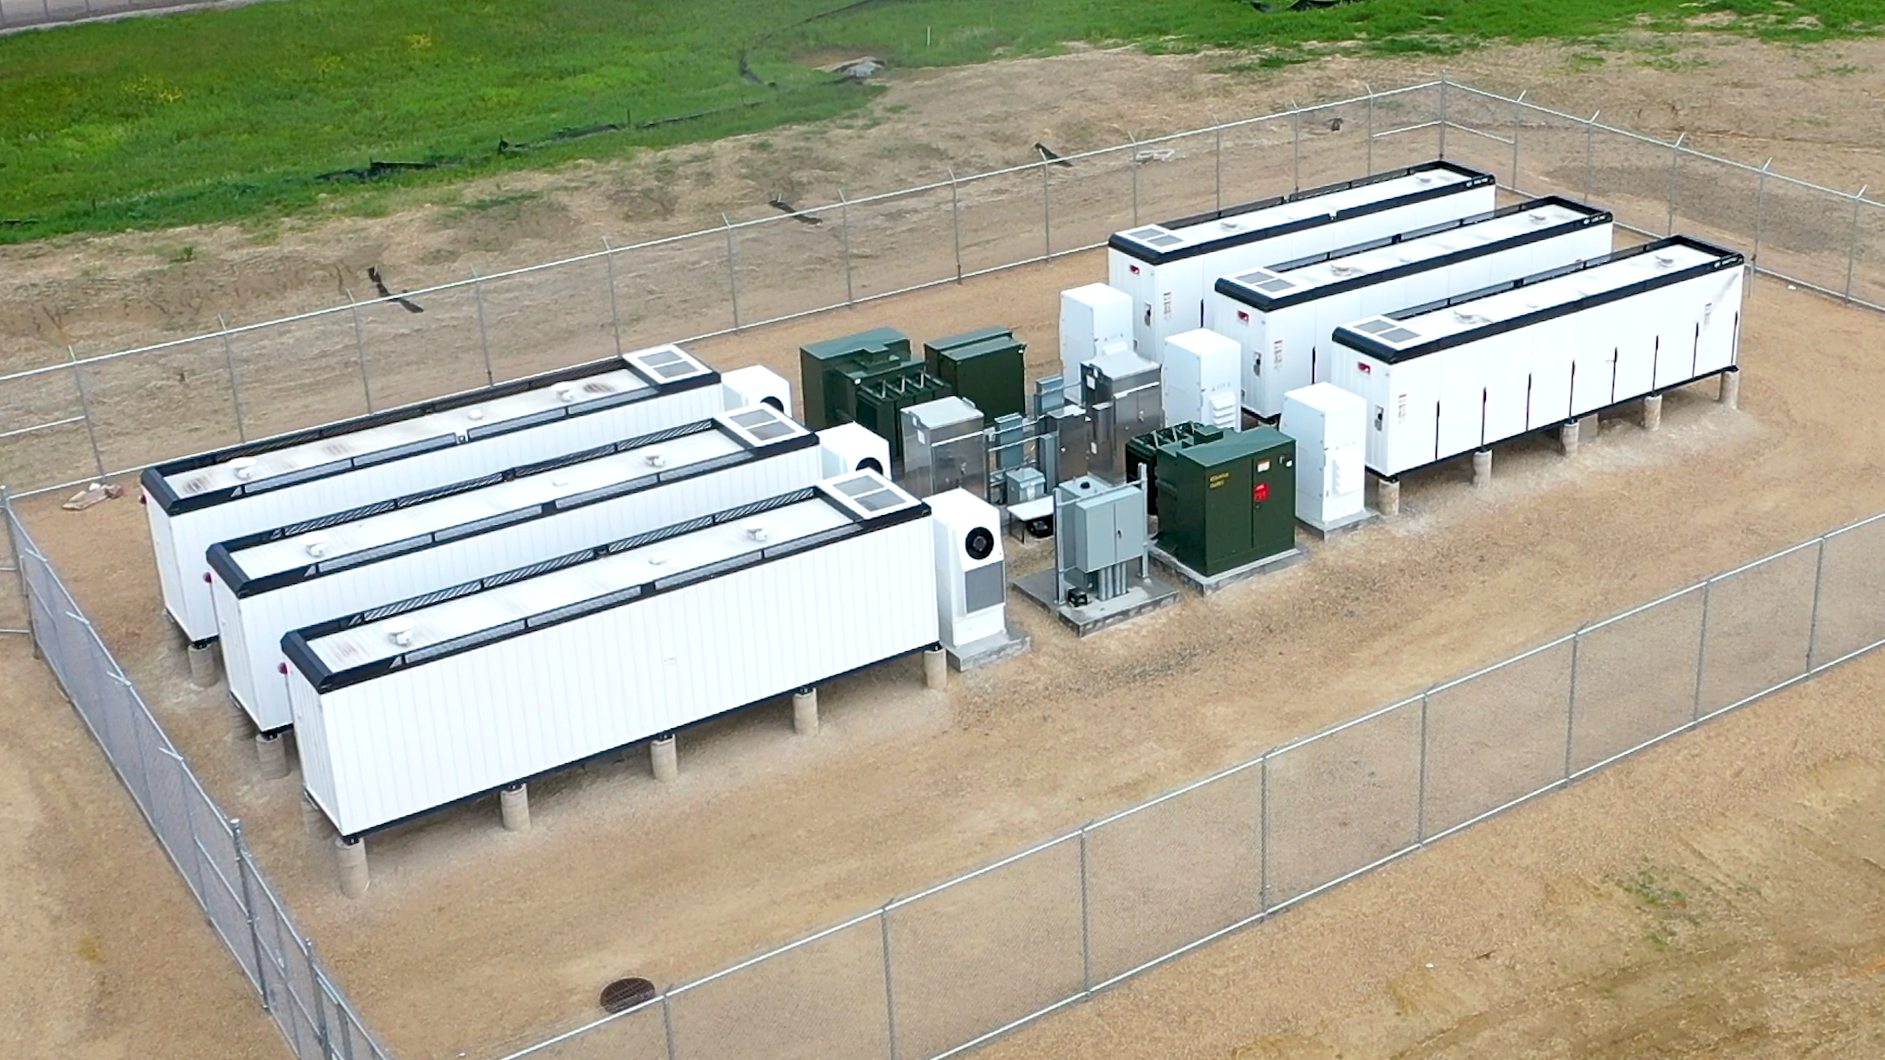 The new battery storage system will be adjacent to the Alliant Energy Deer Run substation in Cedar Rapids.